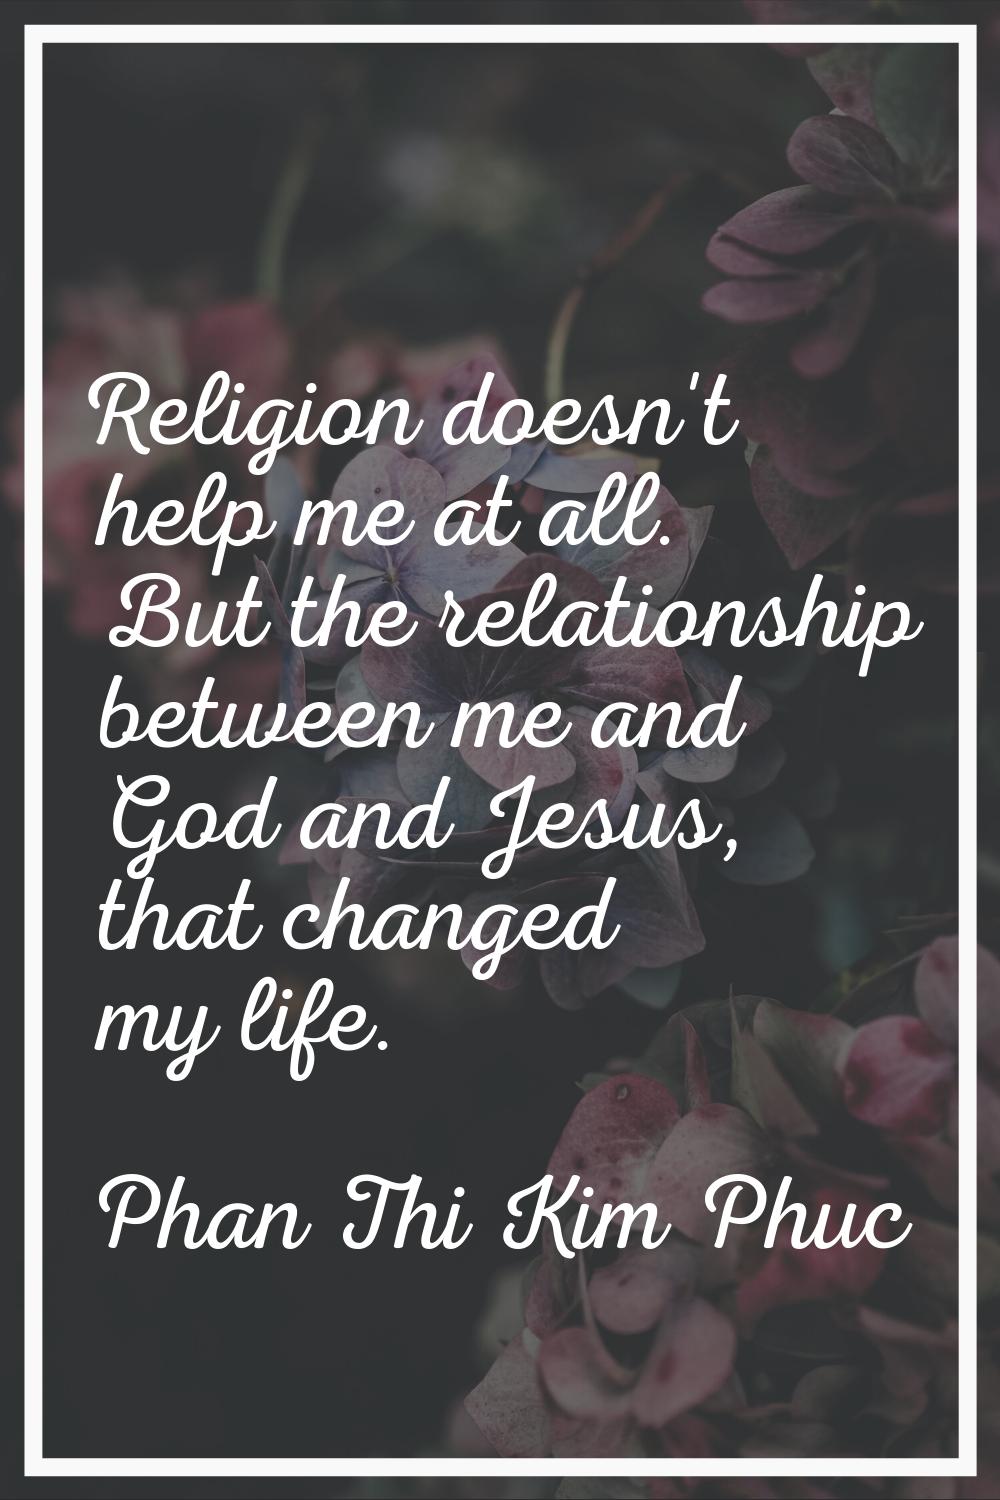 Religion doesn't help me at all. But the relationship between me and God and Jesus, that changed my